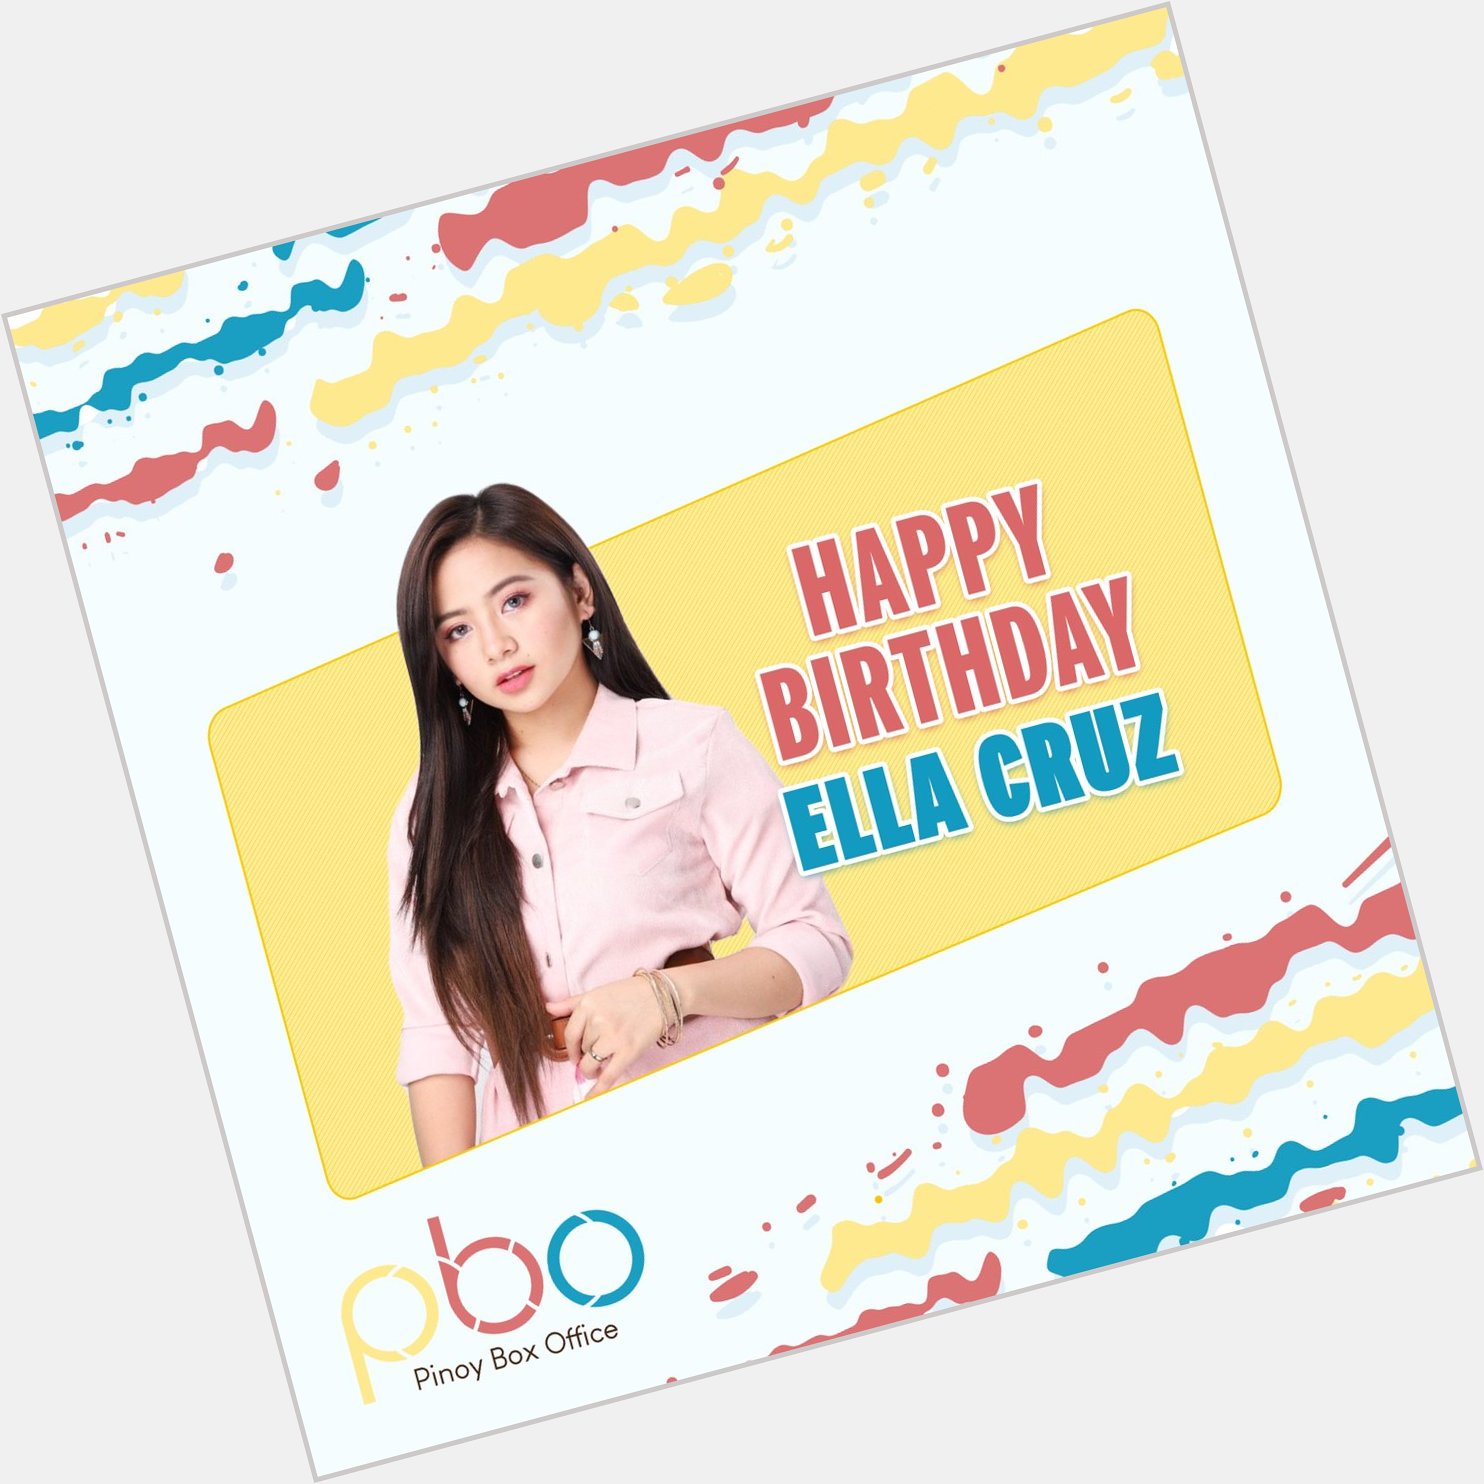 Happy birthday, Ella Cruz ! Wishing you a day filled with happiness and love! 